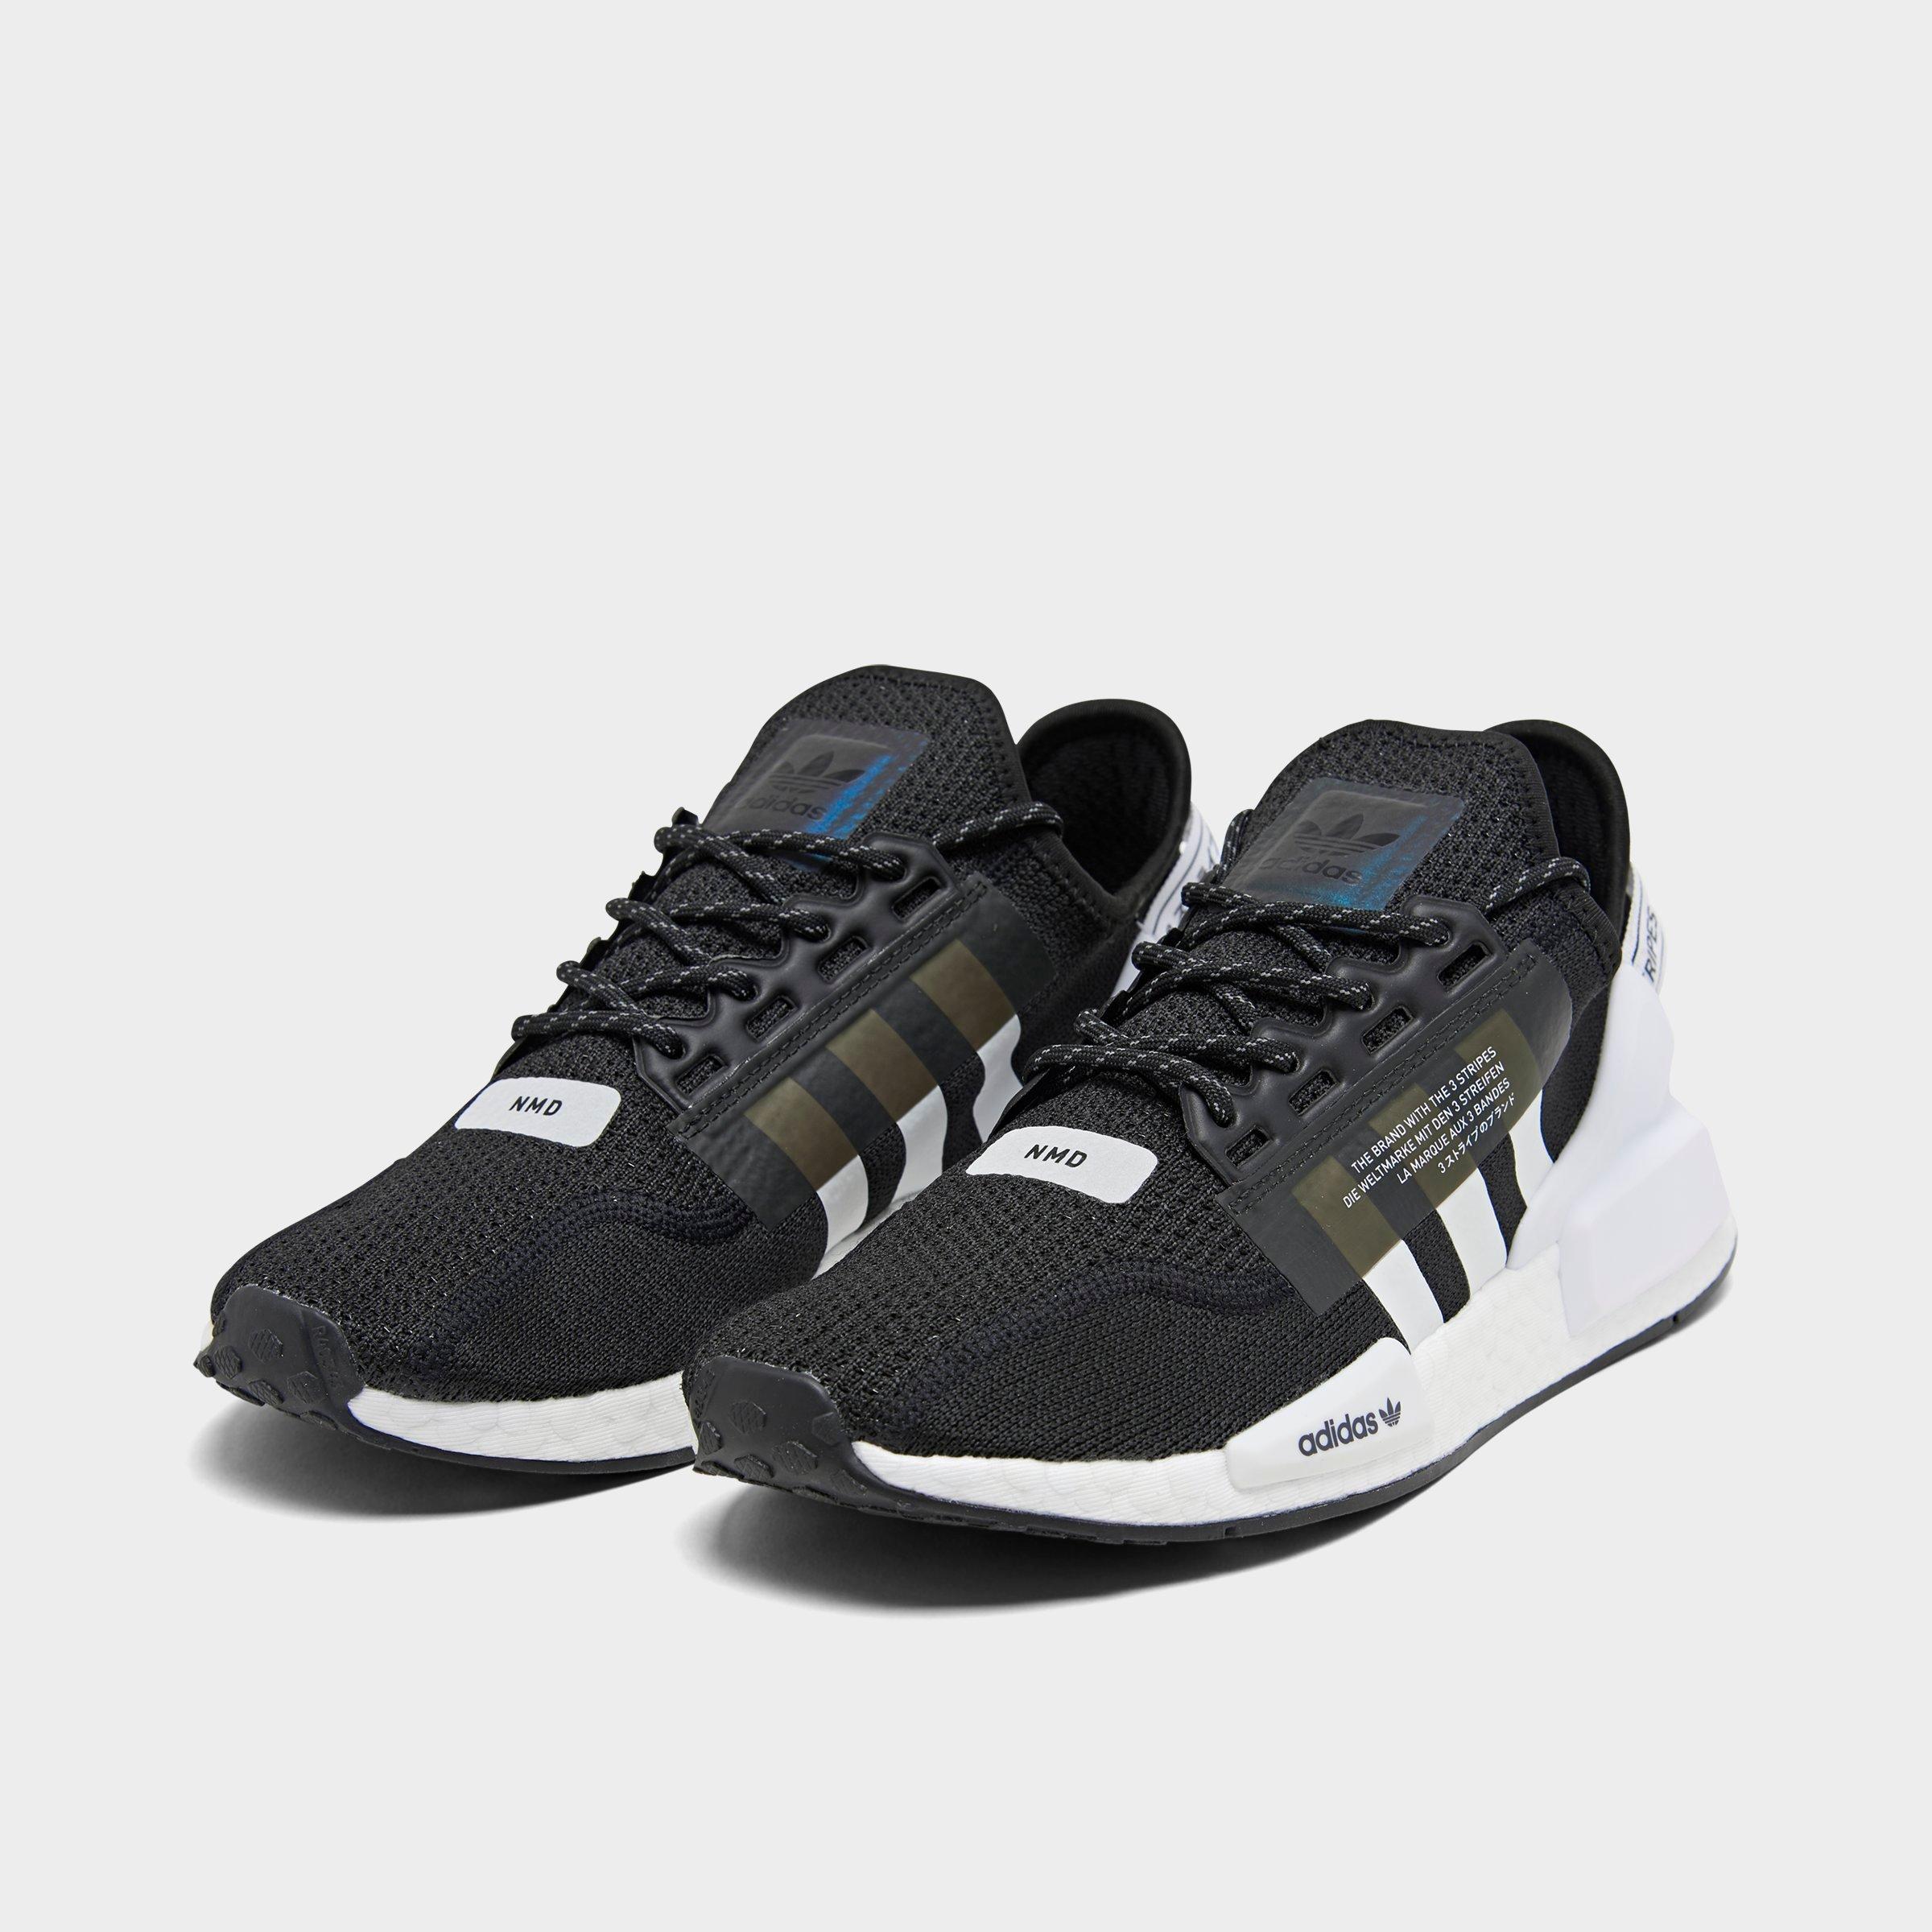 adidas nmd r1 size 3 off 57%